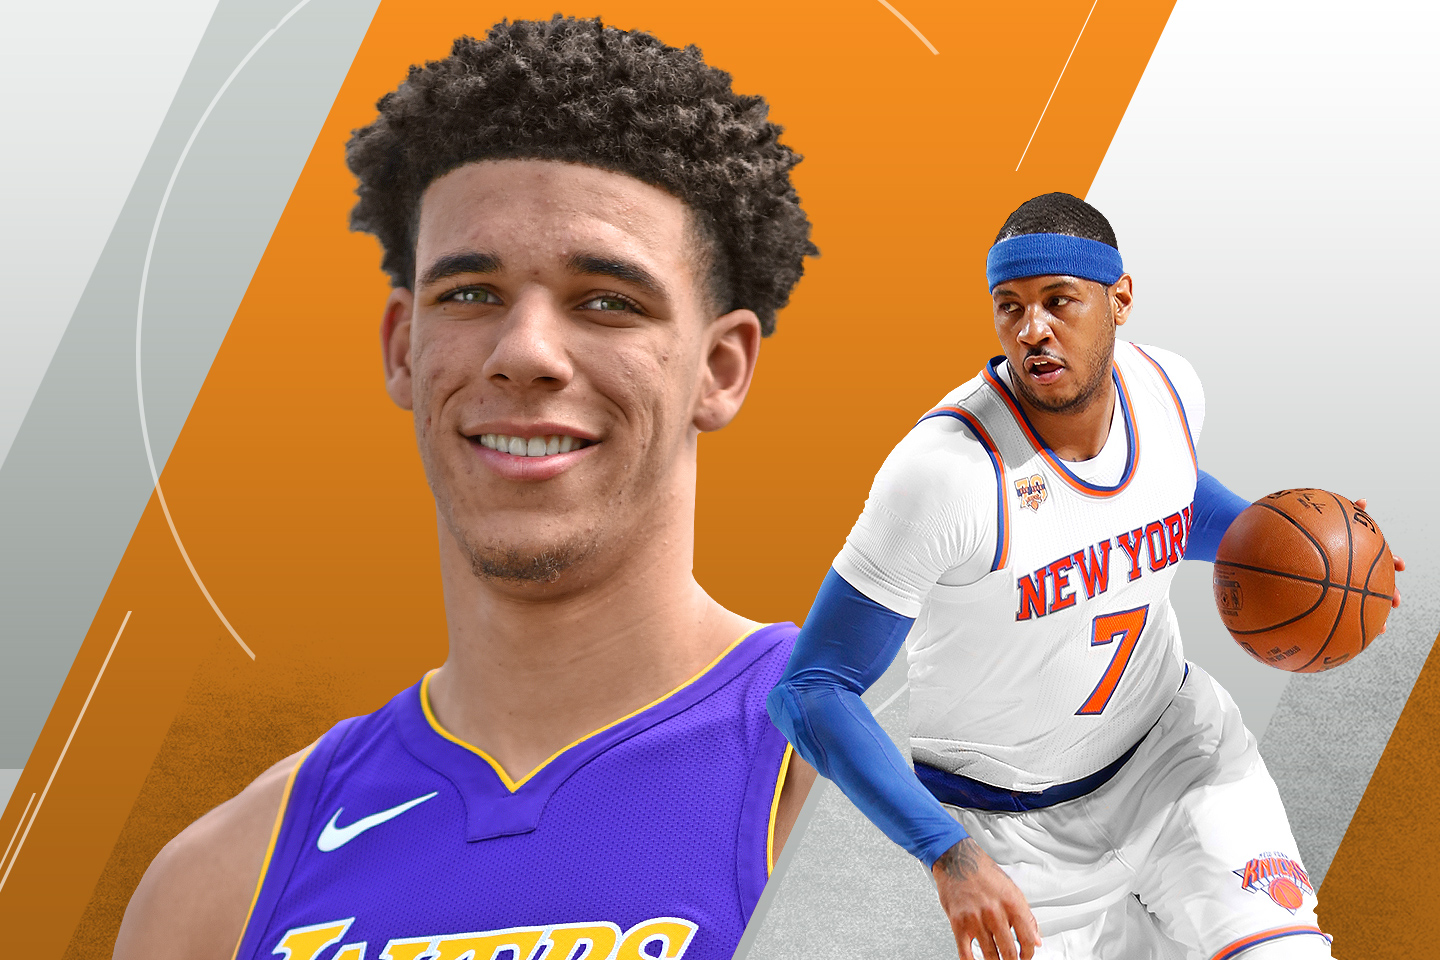 New York Knicks: Ranking the Top 10 players on 2017-18 roster